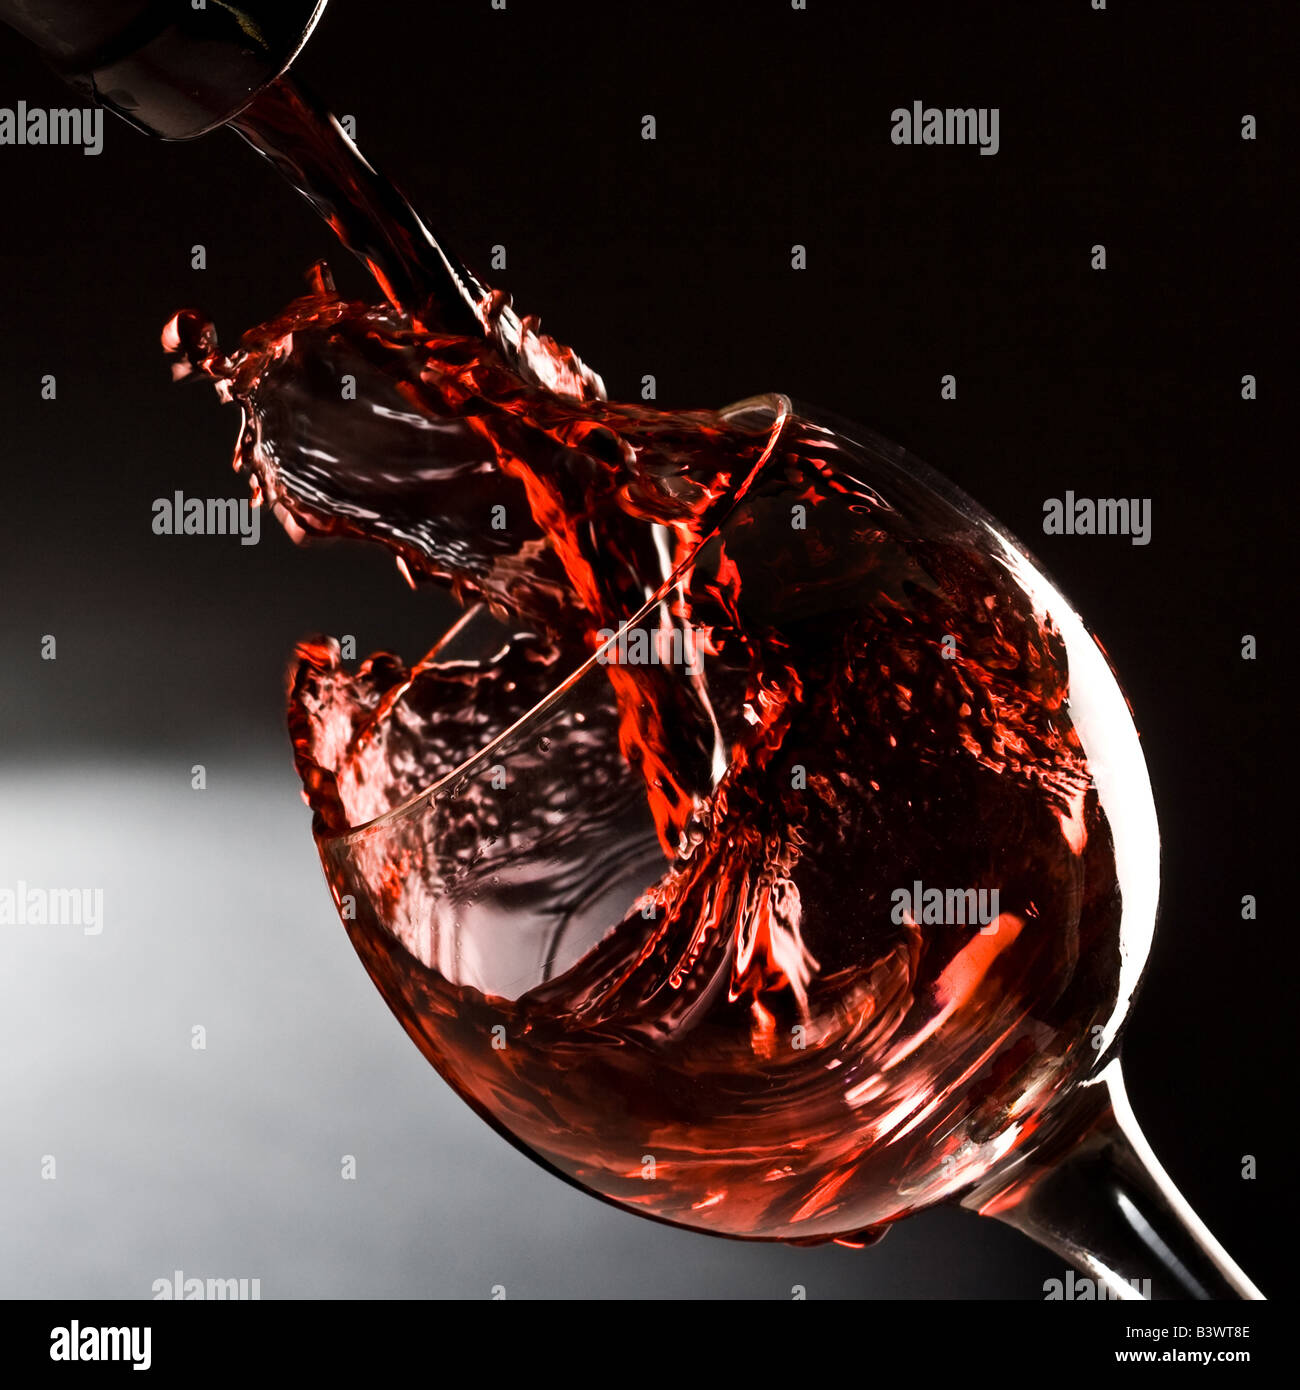 Red wine pouring down into a wine glass Stock Photo